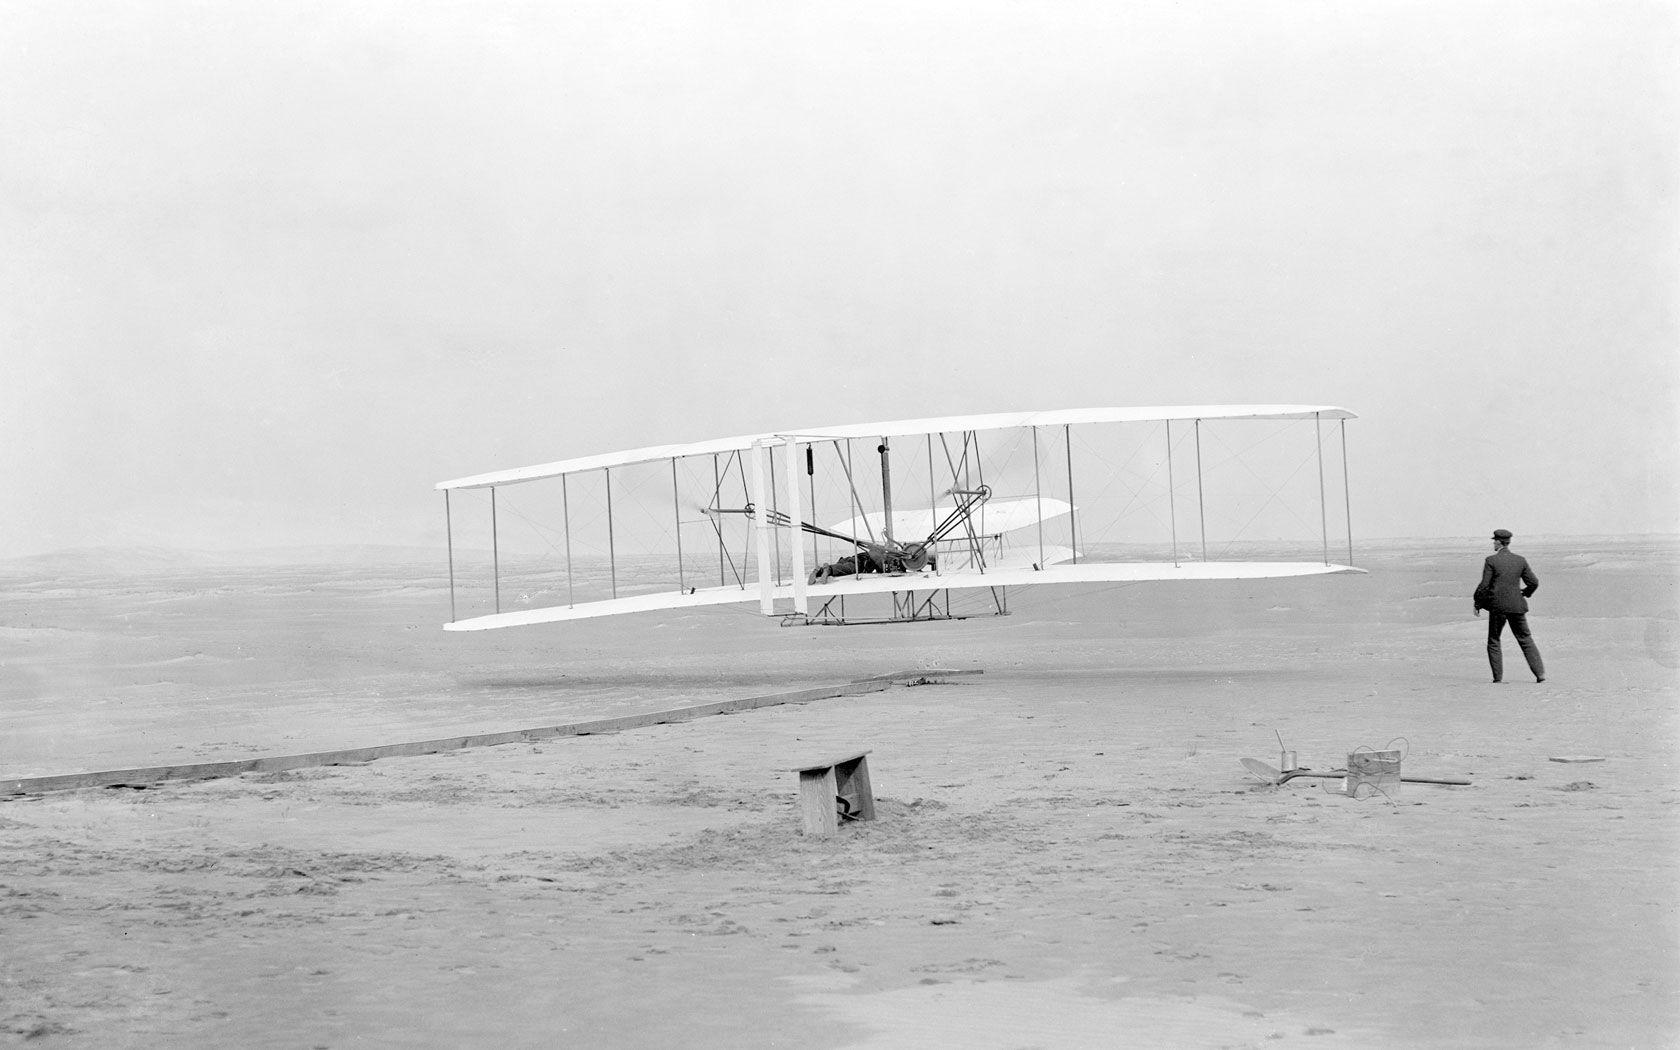 Wright-flyer-